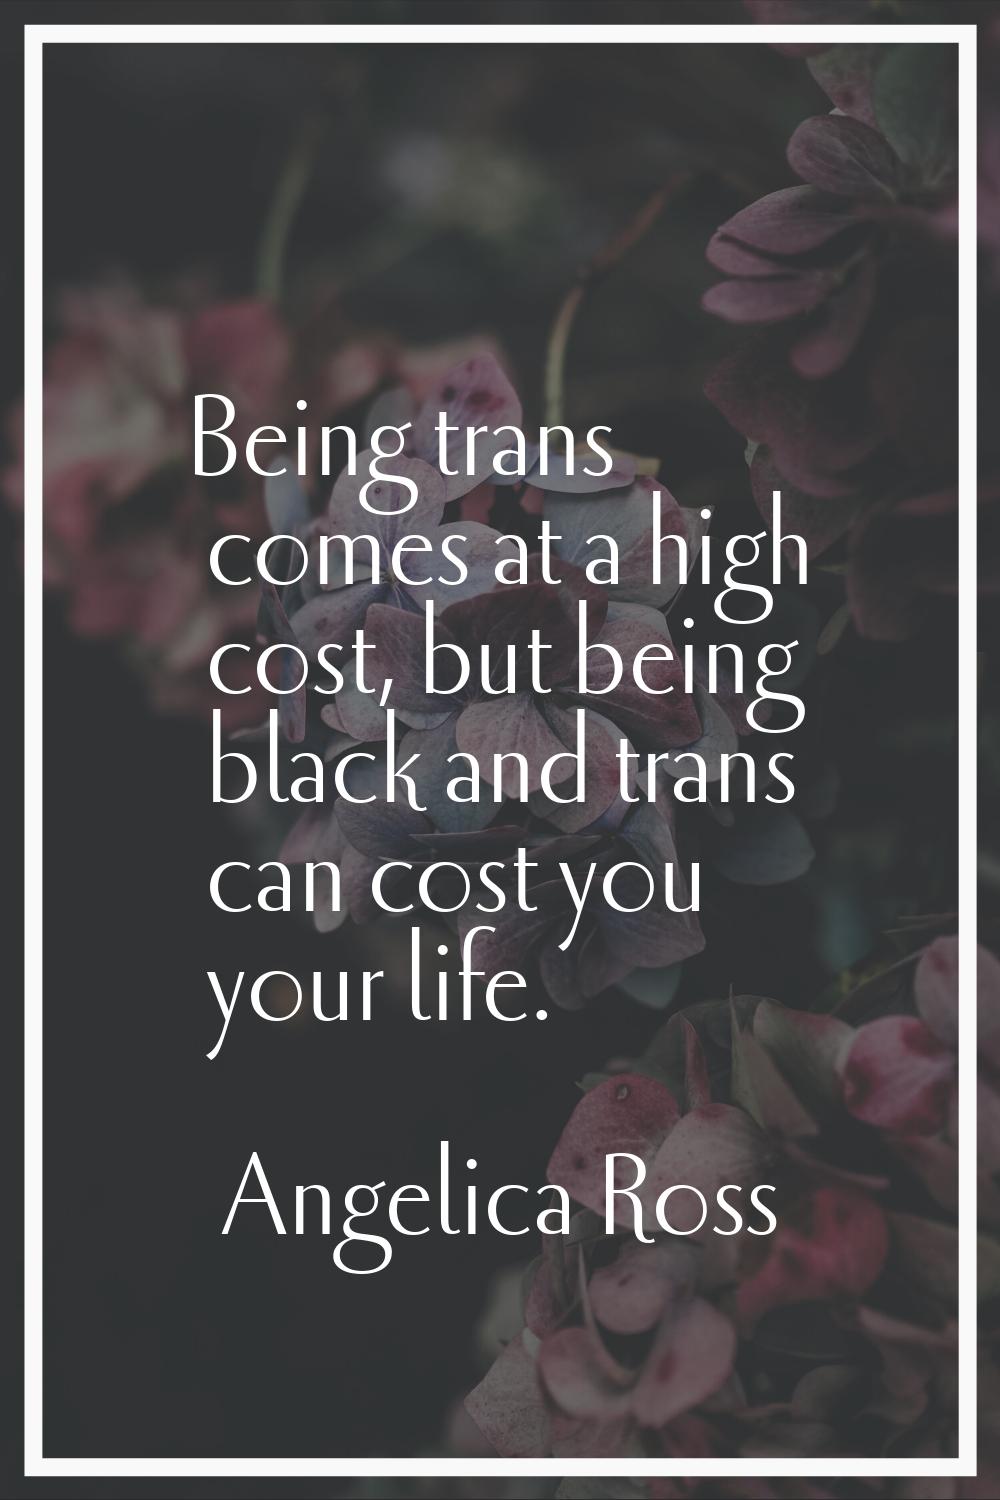 Being trans comes at a high cost, but being black and trans can cost you your life.